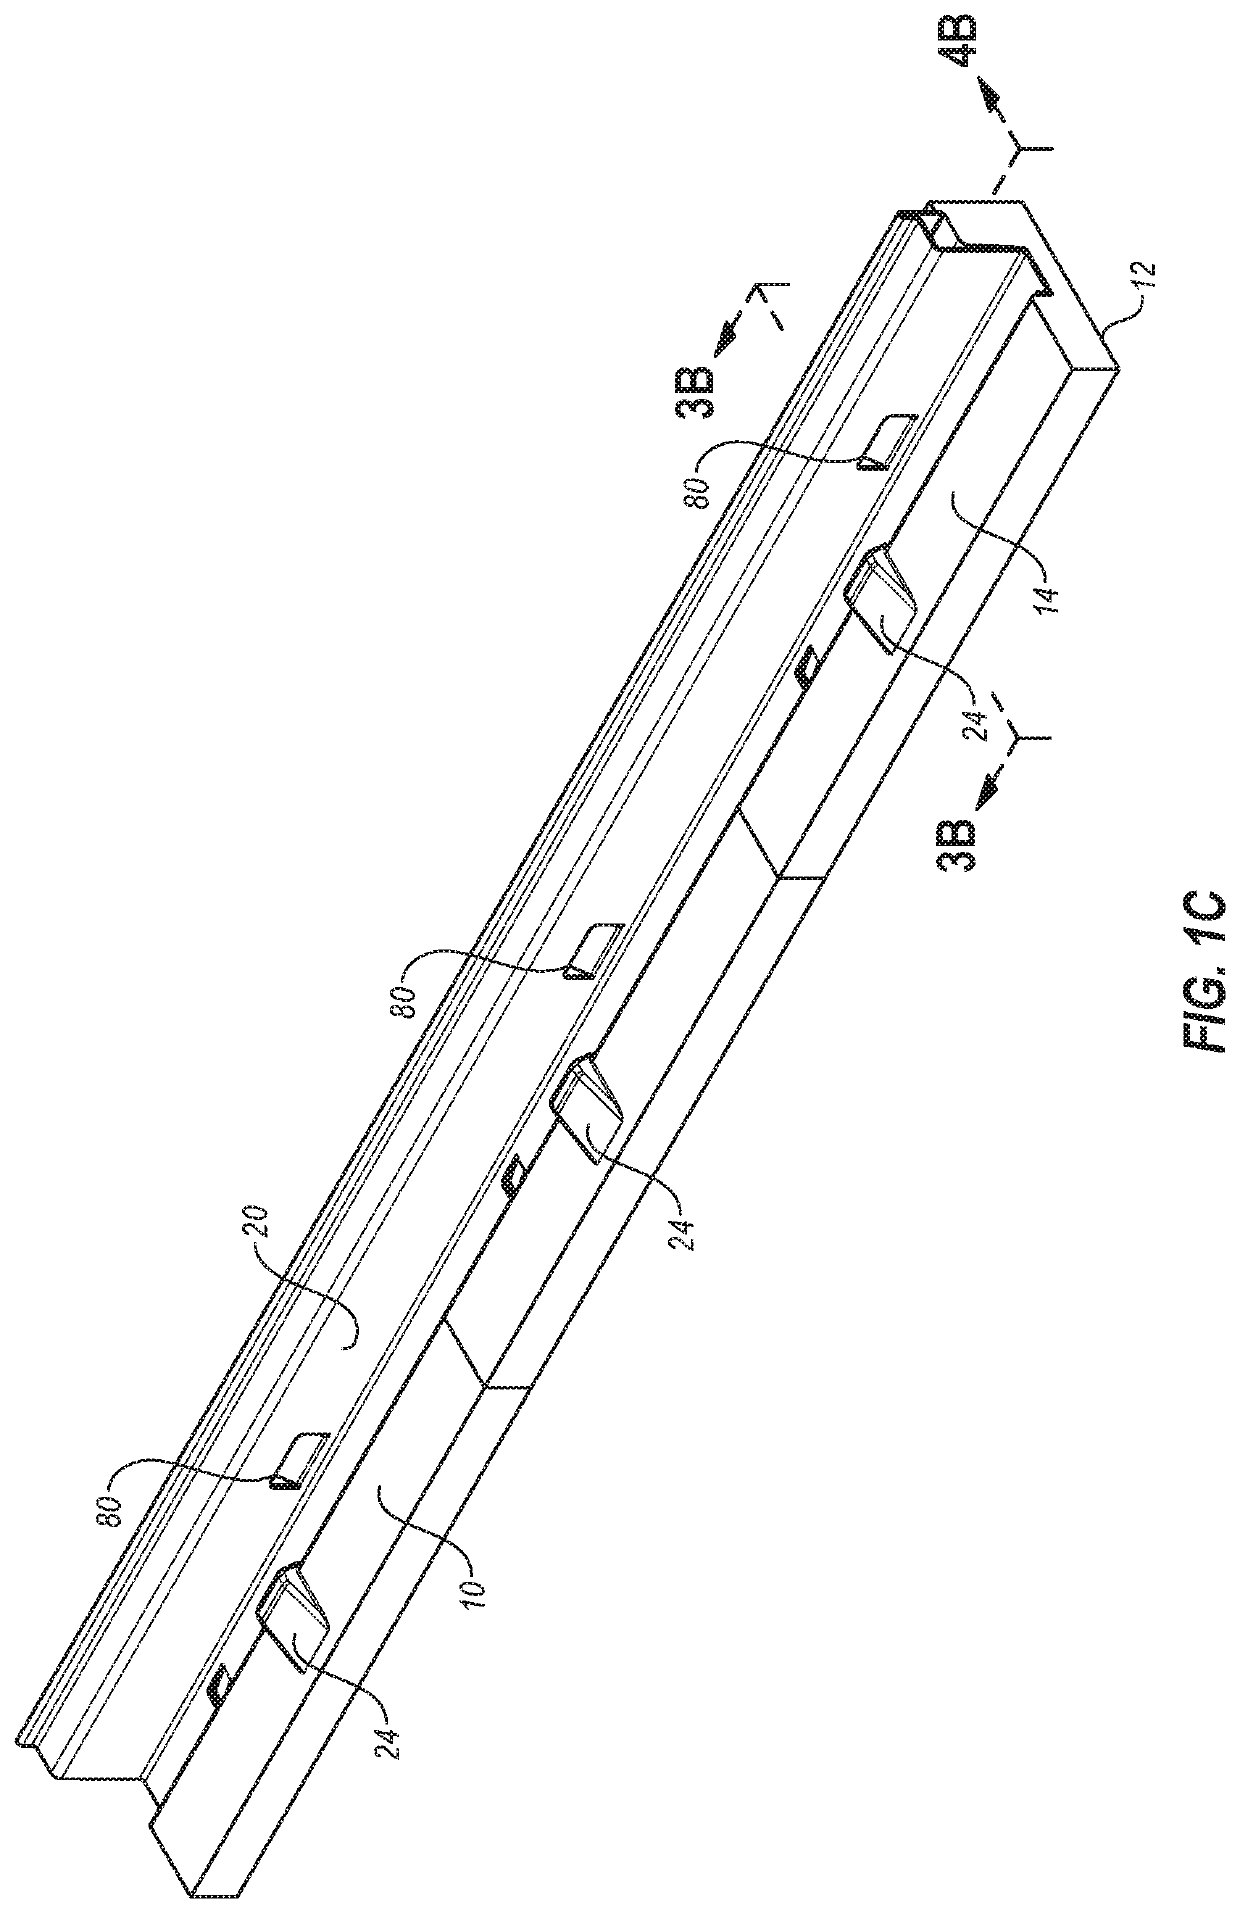 Connection of a support to a molded plastic structure